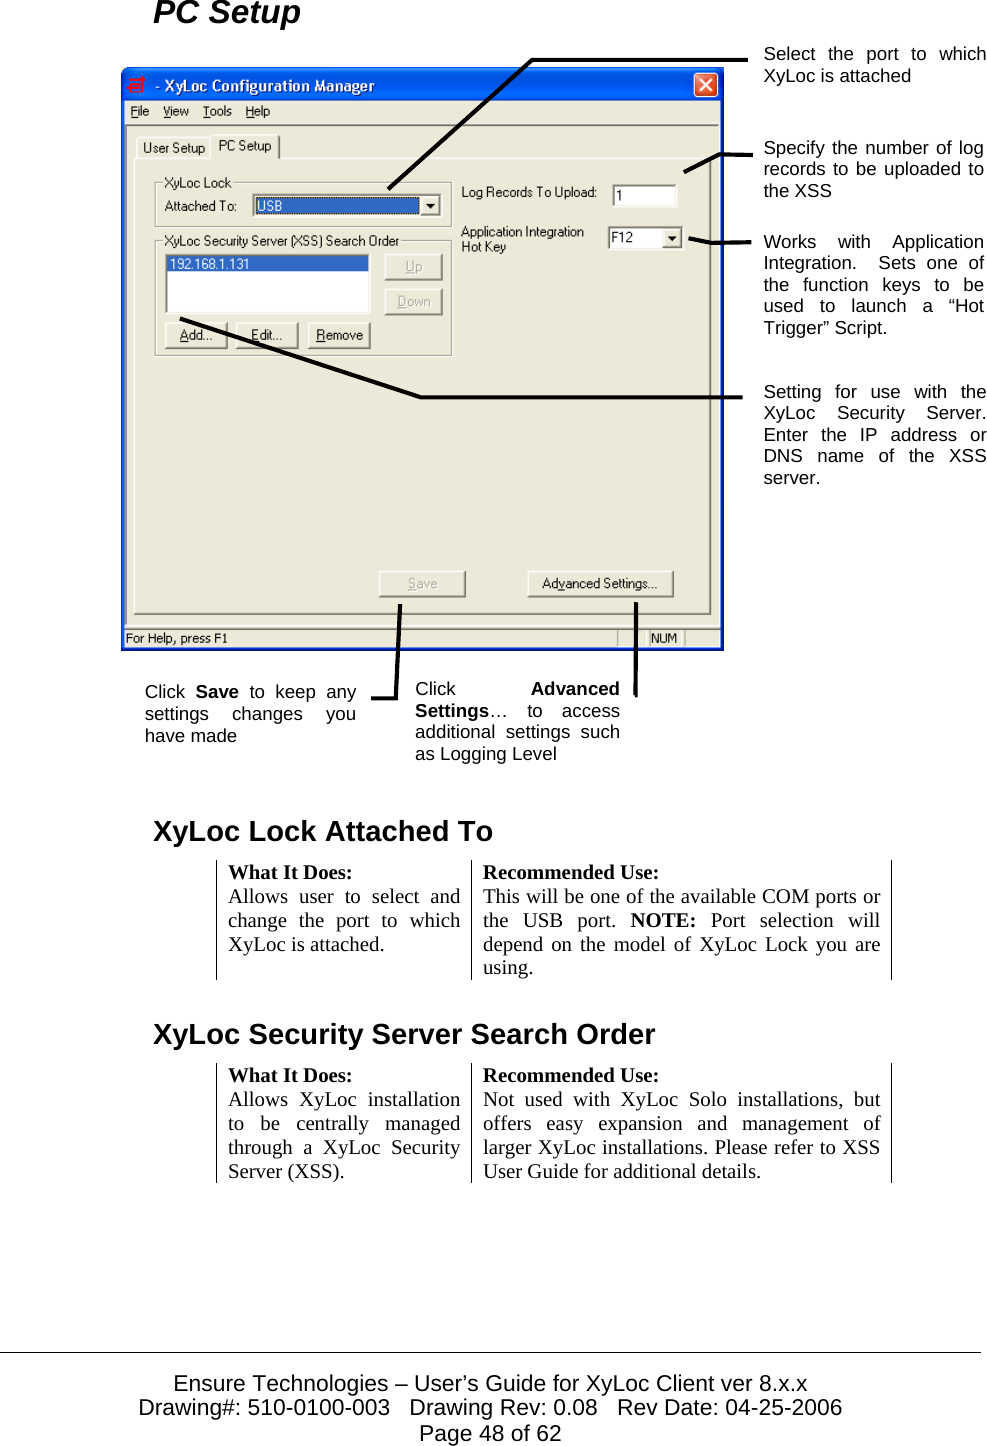  Ensure Technologies – User’s Guide for XyLoc Client ver 8.x.x Drawing#: 510-0100-003   Drawing Rev: 0.08   Rev Date: 04-25-2006 Page 48 of 62 PC Setup     XyLoc Lock Attached To What It Does:  Recommended Use: Allows user to select and change the port to which XyLoc is attached. This will be one of the available COM ports or the USB port. NOTE:  Port selection will depend on the model of XyLoc Lock you are using. XyLoc Security Server Search Order What It Does:  Recommended Use: Allows XyLoc installation to be centrally managed through a XyLoc Security Server (XSS). Not used with XyLoc Solo installations, but offers easy expansion and management of larger XyLoc installations. Please refer to XSS User Guide for additional details. Select the port to whichXyLoc is attached Click AdvancedSettings… to accessadditional settings suchas Logging Level Click  Save to keep any settings changes youhave made Setting for use with theXyLoc Security Server.Enter the IP address orDNS name of the XSSserver. Works with ApplicationIntegration.  Sets one ofthe function keys to beused to launch a “HotTrigger” Script. Specify the number of logrecords to be uploaded tothe XSS 